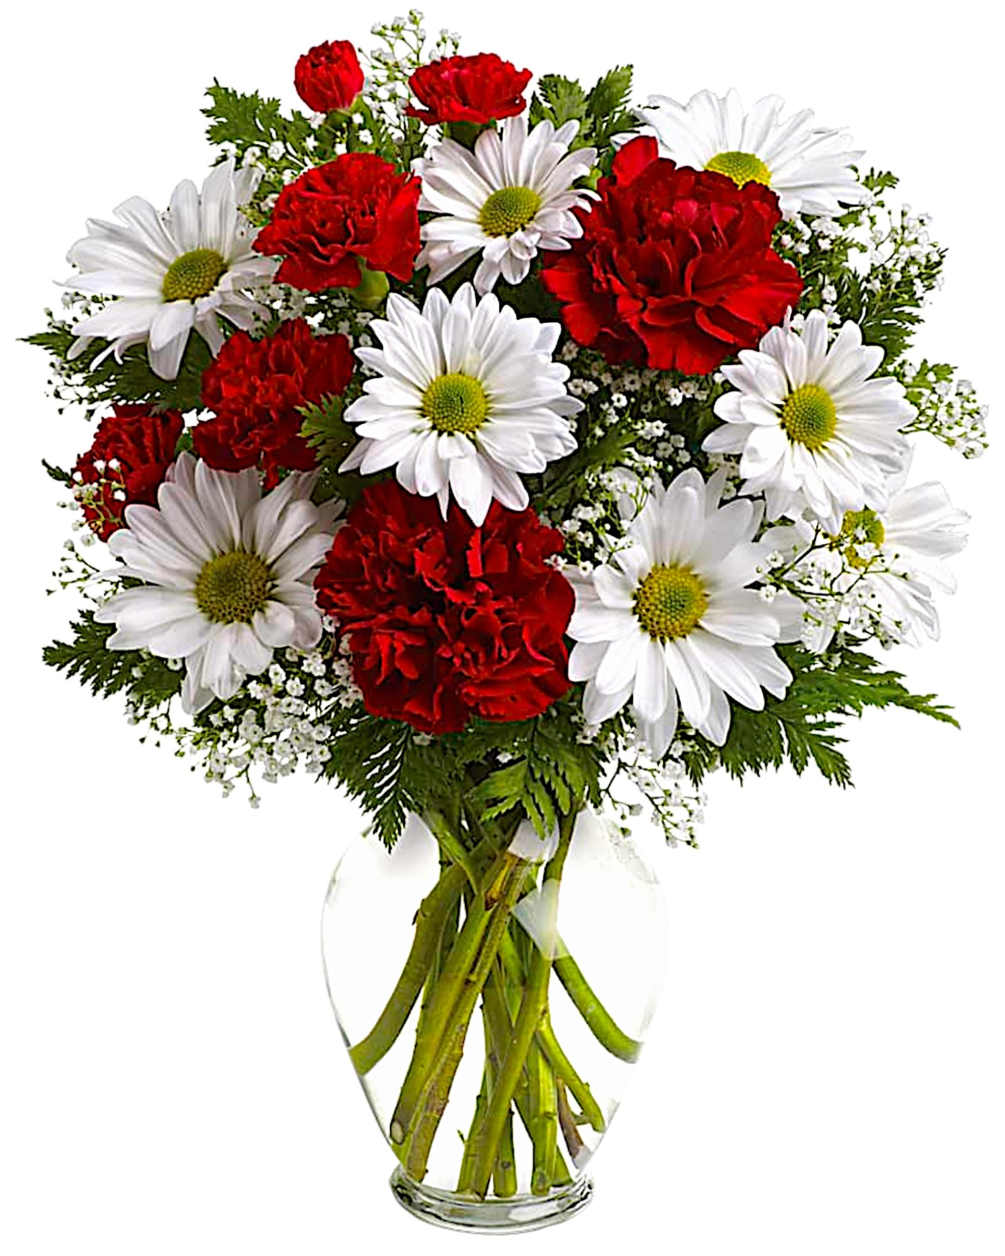 Share your heart&#039;s true feelings with this delightful red and white arrangement.